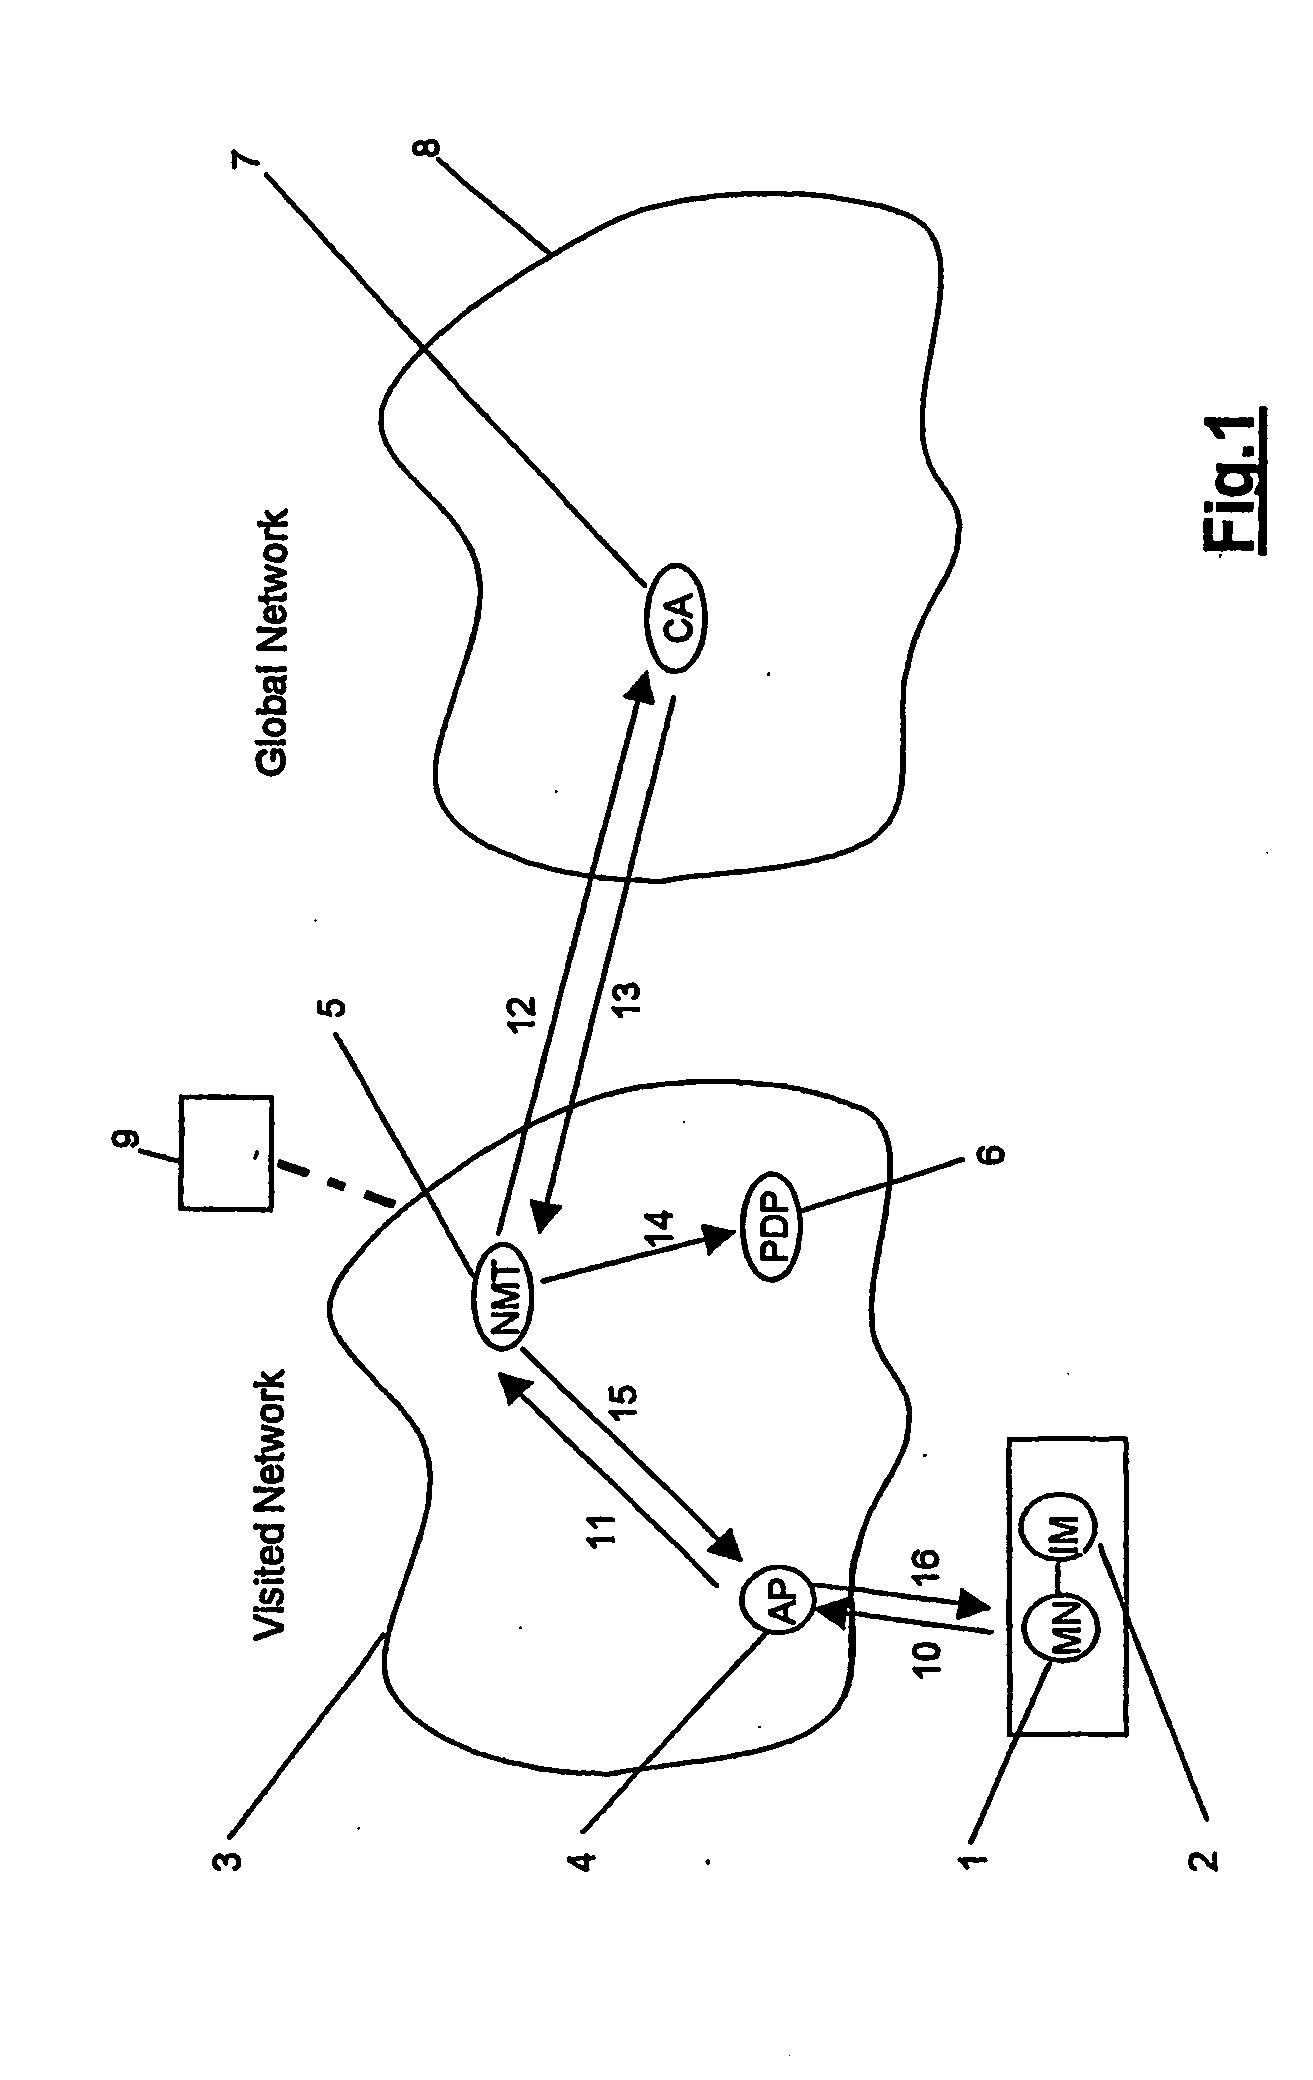 Use of a public key key pair in the terminal for authentication and authorization of the telecommunication user with the network operator and business partners